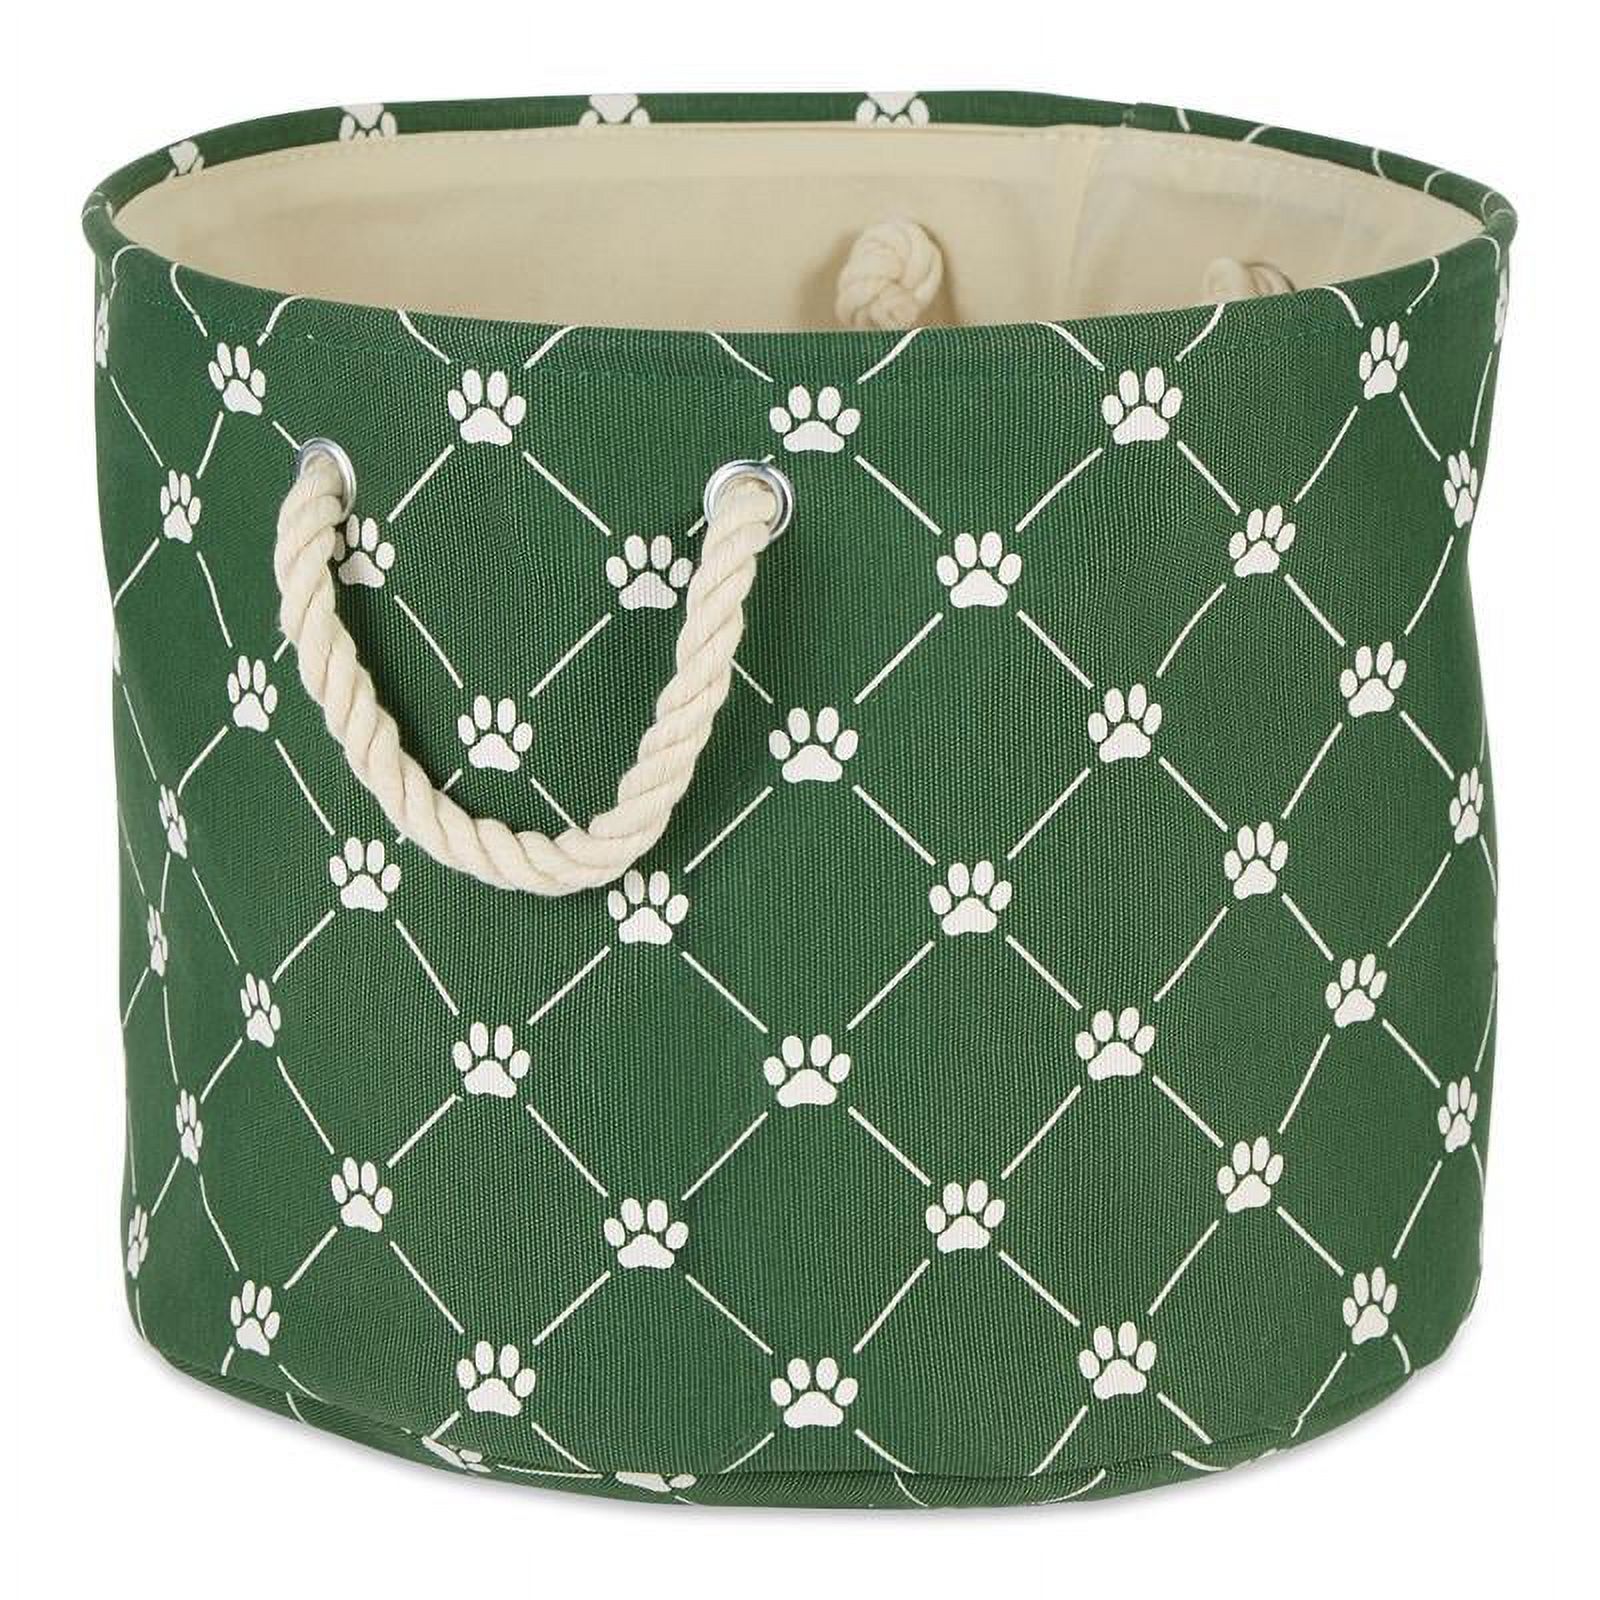 Picture of Design Imports CAMZ14240 Polyester Trellis Paw Round Pet Bin, Hunter Green